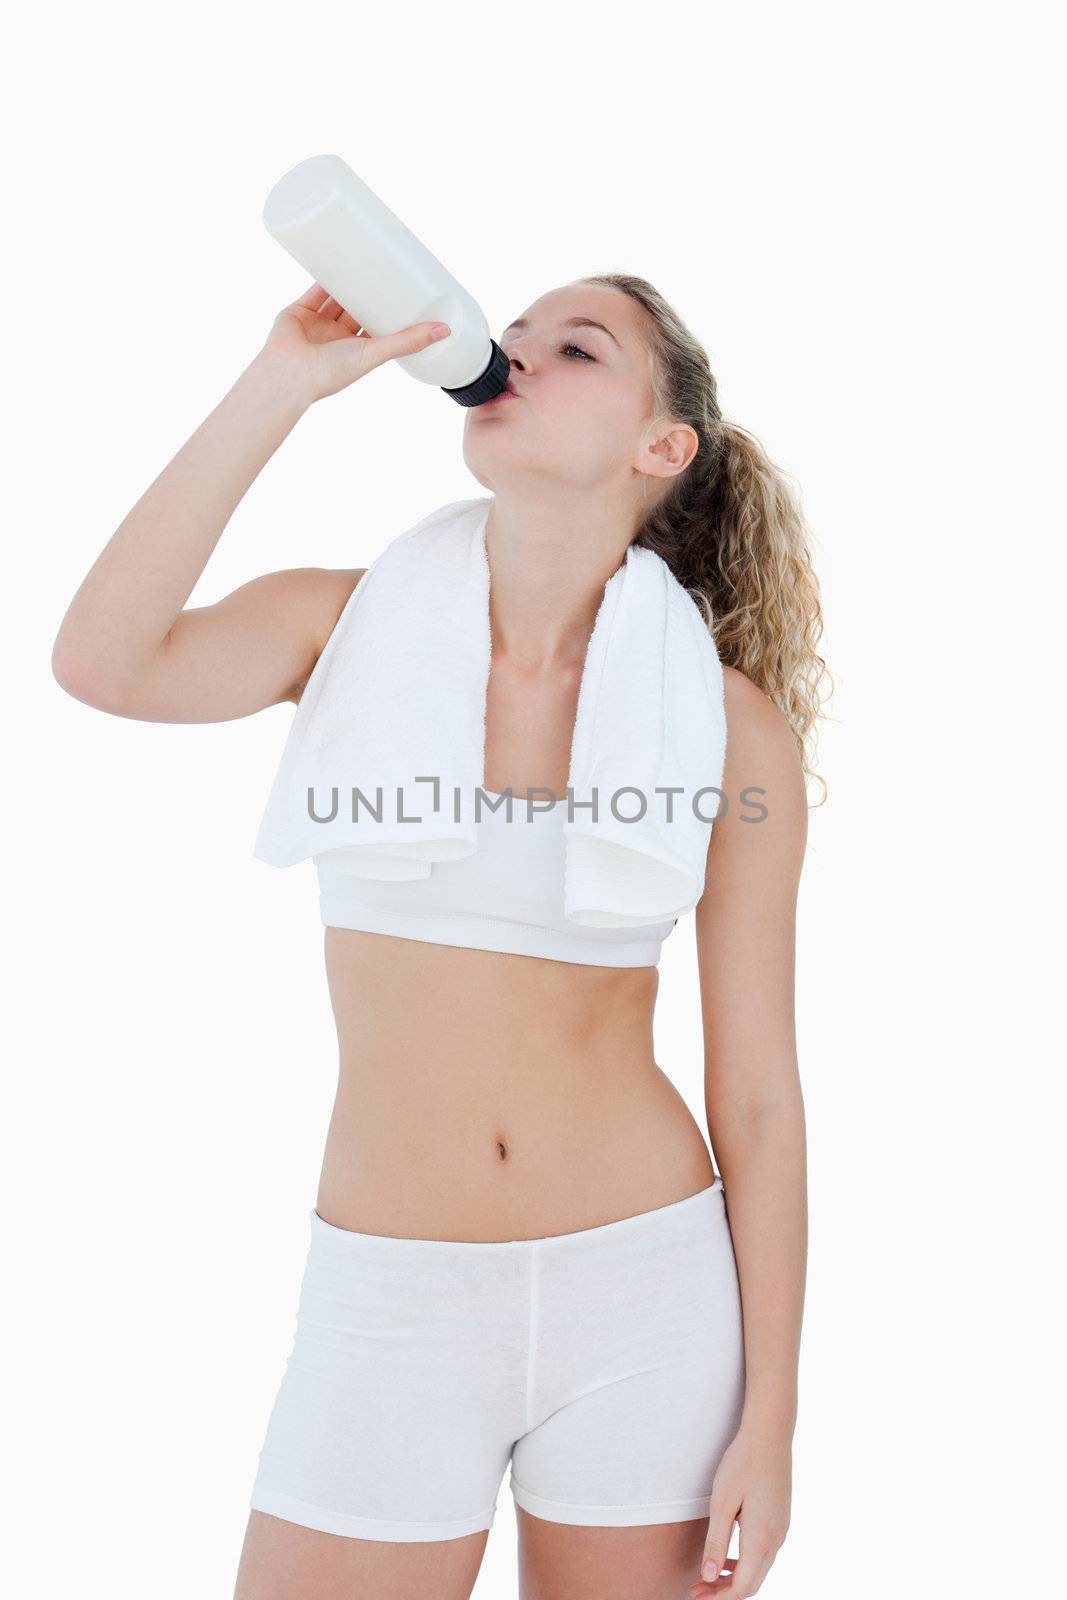 Young woman drinking water during sports against a white background